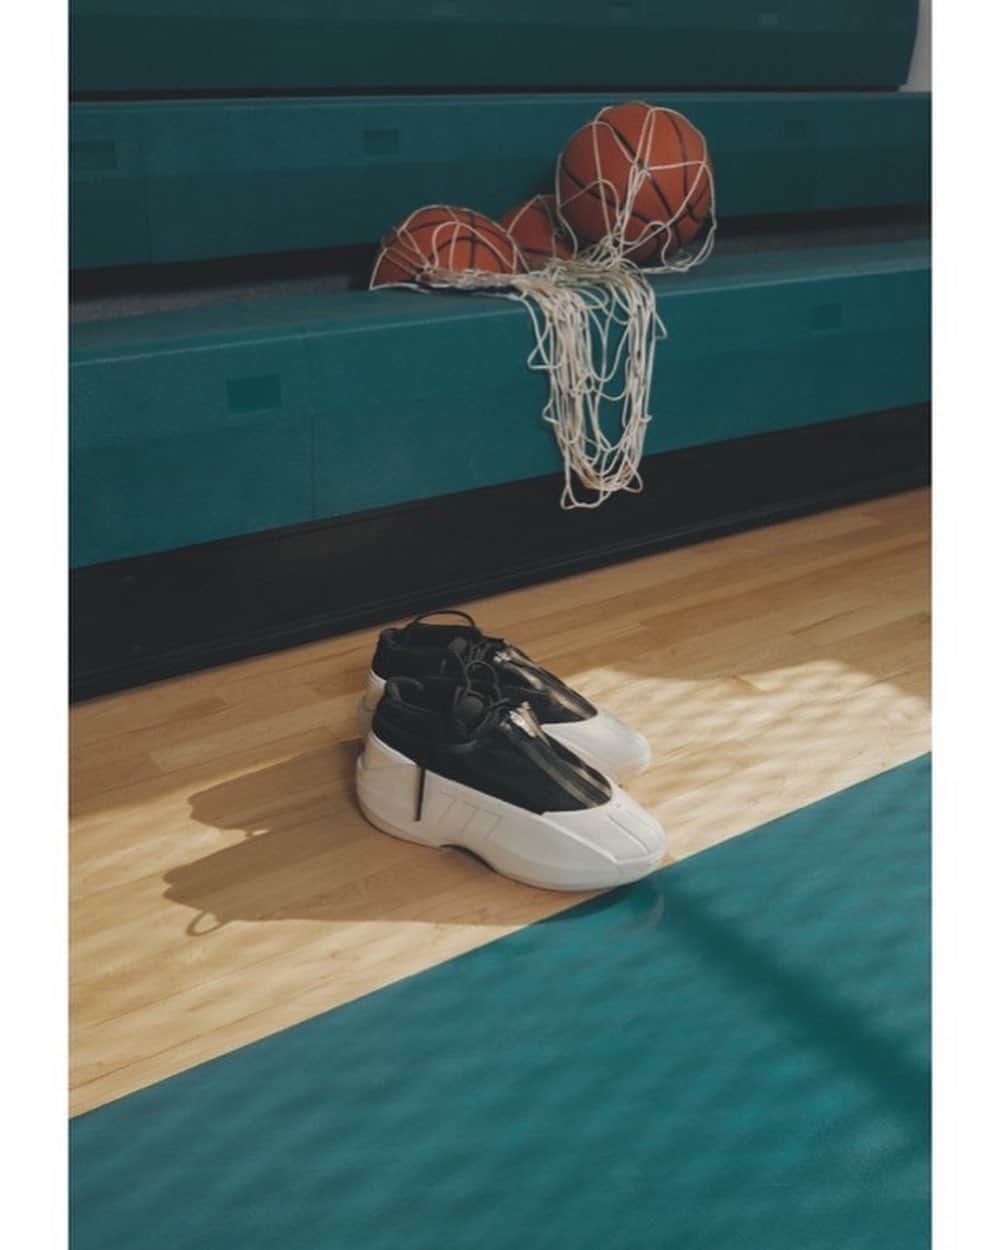 アトモスさんのインスタグラム写真 - (アトモスInstagram)「. adidas BASKETBALLバスケットボールから、バスケットボールへの情熱とオーセンティックなスタイルを追求したCRAZY IIINFINITY 2.5が登場。 CRAZY IIINFINITY 2.5は、あらゆる雑音を排除し、バスケットボールをプレーする、その情熱の原点へ回帰する「REMEMBER THE WHY 」をテーマにした「 THE 2023 COLLECTION: CHAPTER 03 」です。 adidas BASKETBALLの伝統を踏襲し、コートの中でも外でも、さまざまなシーンで活躍するスタイルを生み出す、新世代のエネルギーがインスピレーションとなっています。 クリーンなブラックとホワイトのカラーウェイで、ダイナミックなシンセティックとテキスタイルのアッパー、洗練された熱可塑性ポリウレタンのサイドウォール、無限の快さのためのジッパー付きメッシュシュラウドを特徴とした大胆なデザイン。 本商品は、現在atmos-tokyo.comにて抽選受付中。  adidas BASKETBALL Basketball introduces the CRAZY IIINFINITY 2.5, a passion for basketball and authentic style. The CRAZY IIINFINITY 2.5 is "THE 2023 COLLECTION: CHAPTER 03" with the theme of "REMEMBER THE WHY" that eliminates all noise and returns to the origin of its passion, playing basketball. Following in the tradition of adidas BASKETBALL, the inspiration is the energy of a new generation that creates styles that work in a variety of settings, both on and off the court. In a clean black and white colorway, the bold design features a dynamic synthetic and textile upper, polished thermoplastic polyurethane sidewalls, and a mesh shroud with zipper for endless pleasure. This product is currently available for lottery orders at atmos-tokyo.com.  #atmos # adidas #RememberTheWhy  @adidastokyo」7月23日 10時06分 - atmos_japan